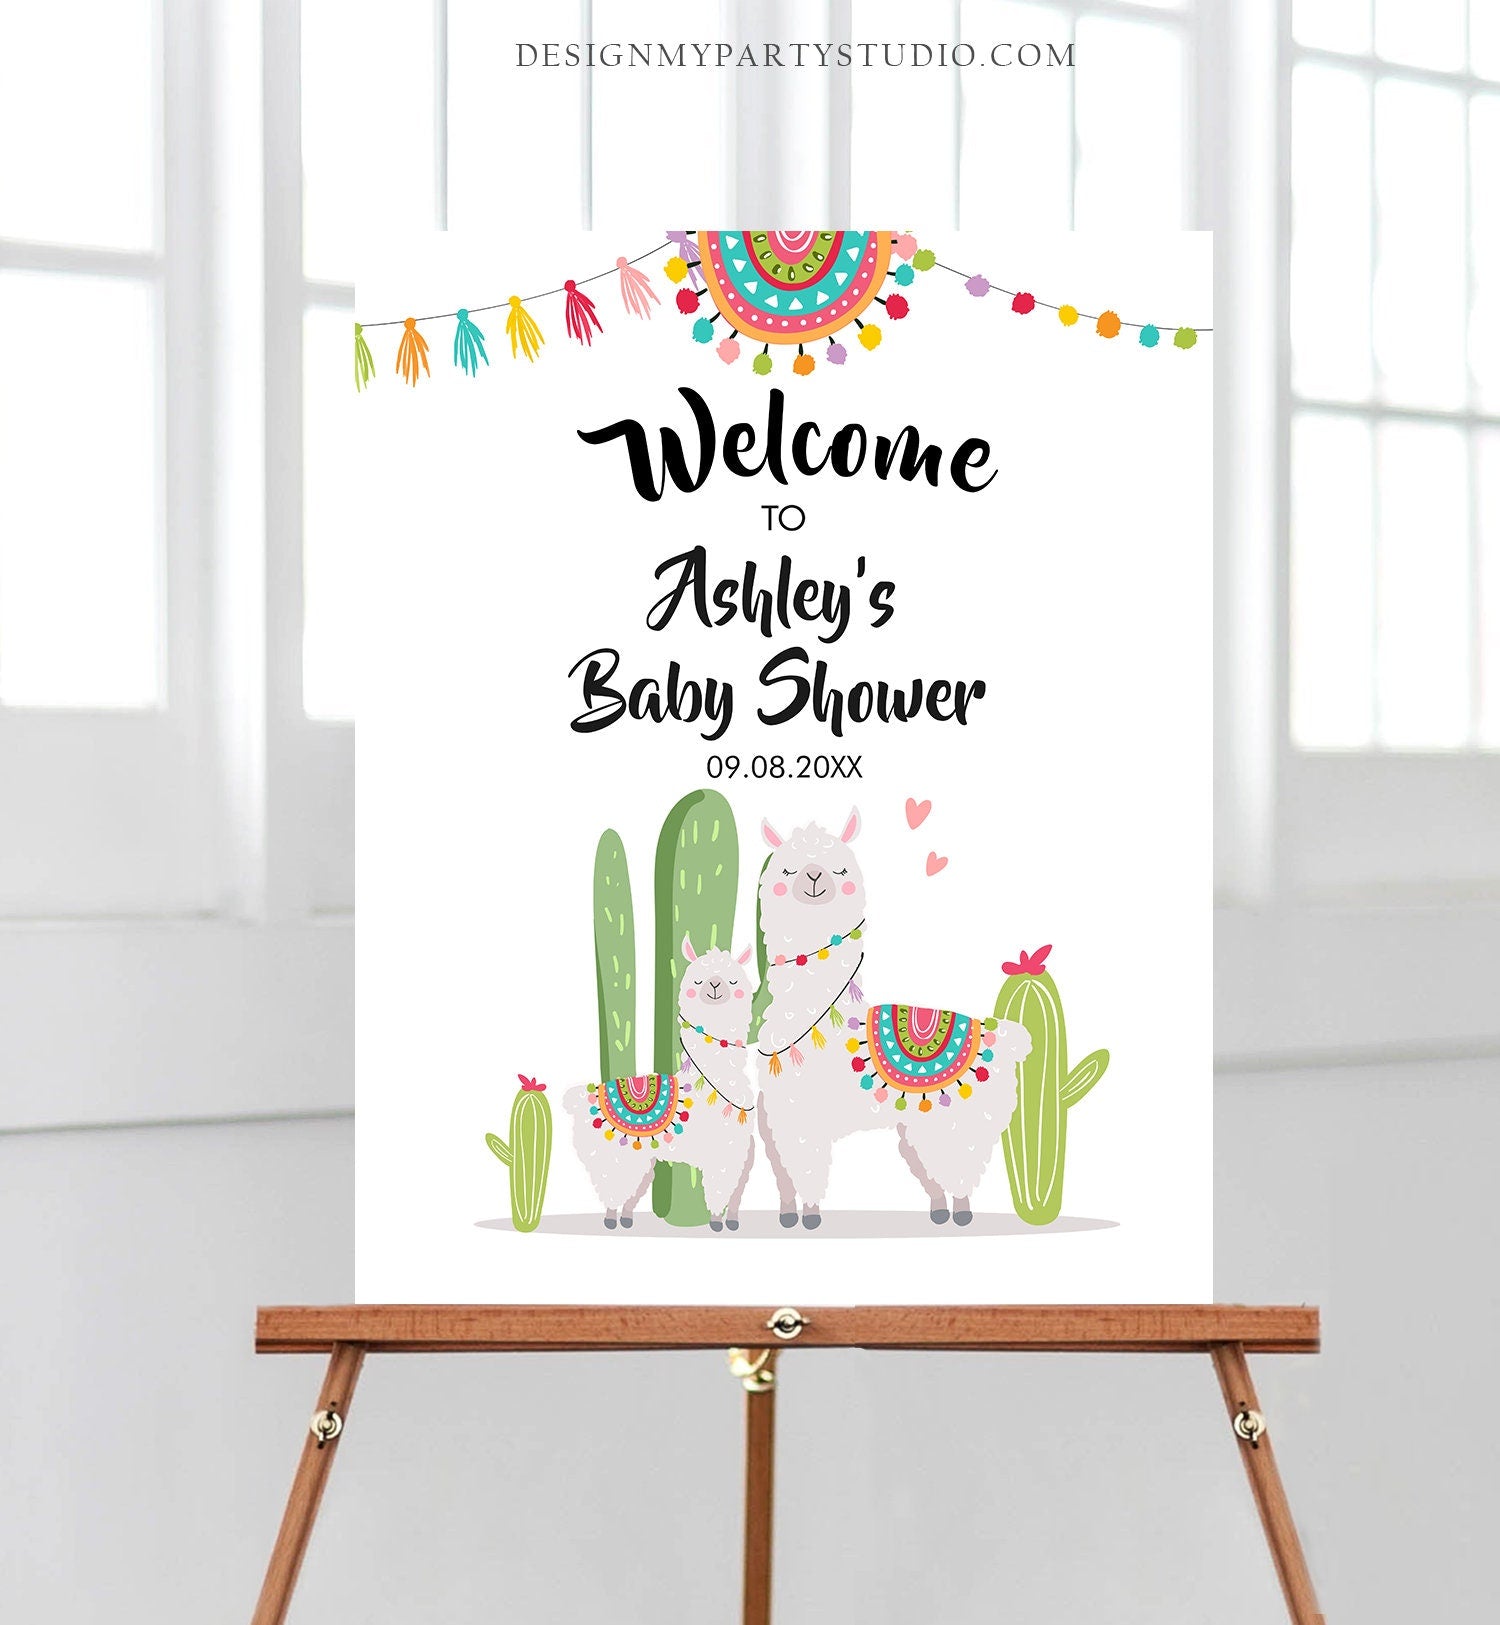 Editable Llama Welcome Sign Llama Baby Shower Welcome Baby Sprinkle Cactus Theme Fiesta Mexican Succulent Neutral Corjl Template 0079